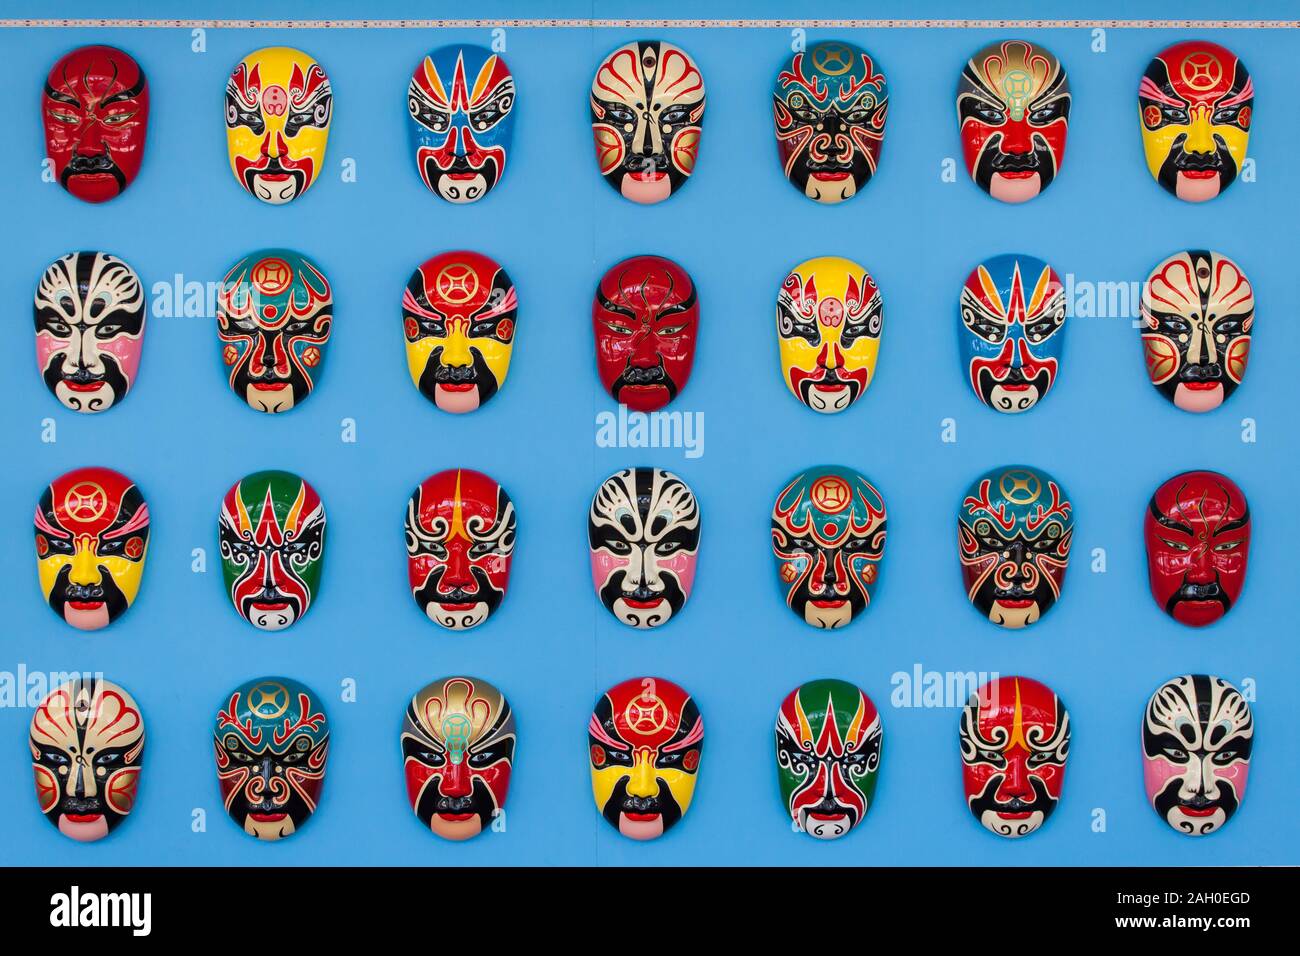 https://c8.alamy.com/comp/2AH0EGD/colourful-hand-painted-chinese-opera-masks-hang-up-neatly-on-a-blue-wall-the-various-colours-mask-each-represents-different-characteristics-2AH0EGD.jpg